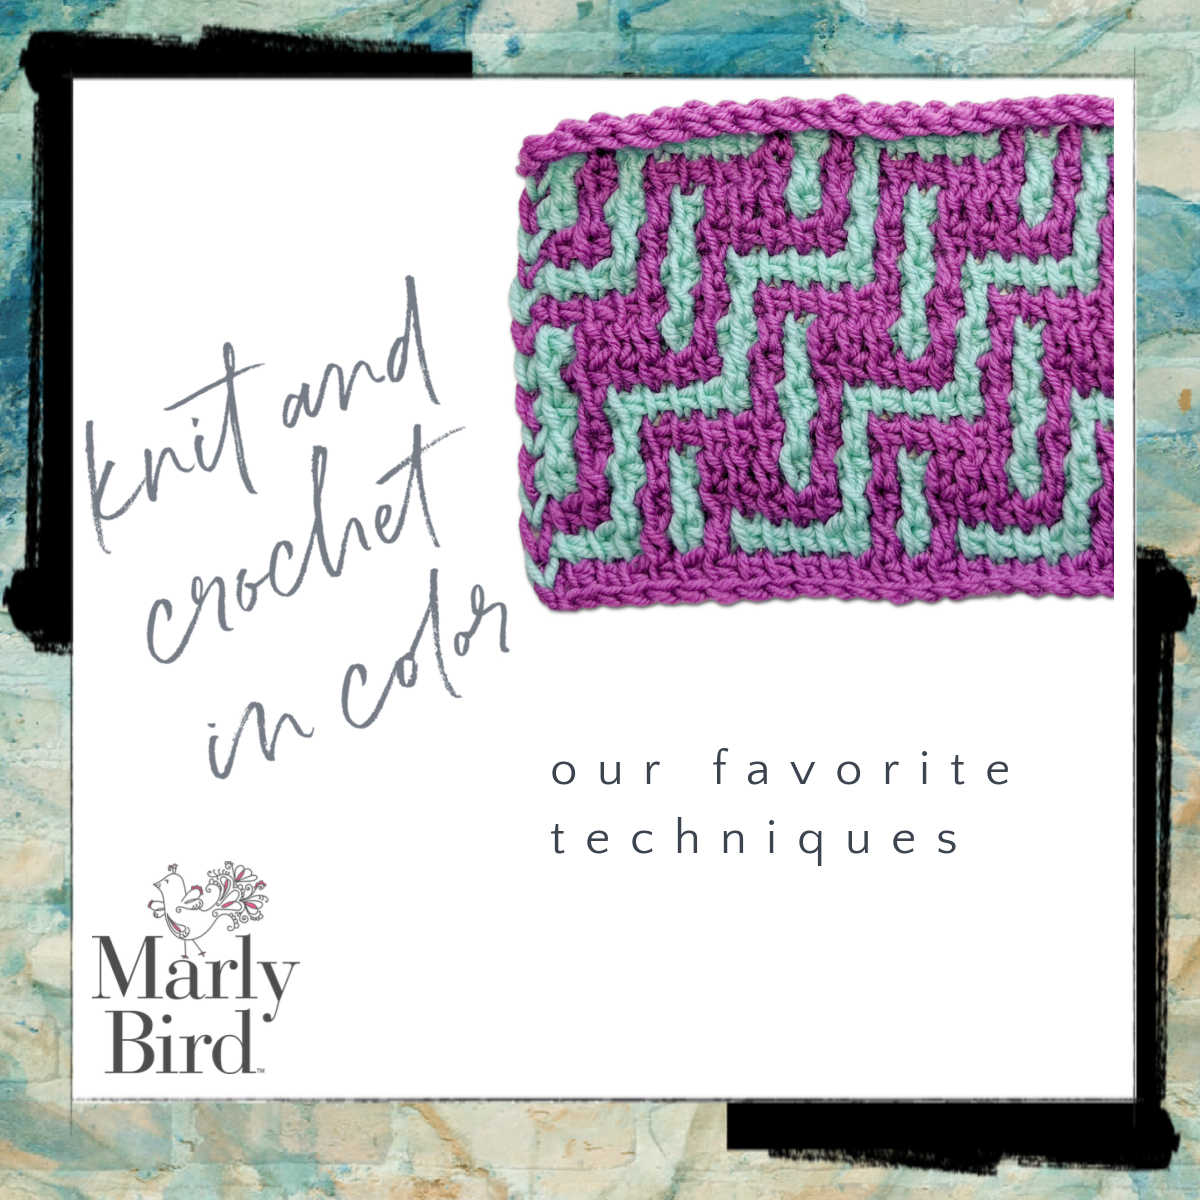 crochet and knit color techniques - Marly Bird